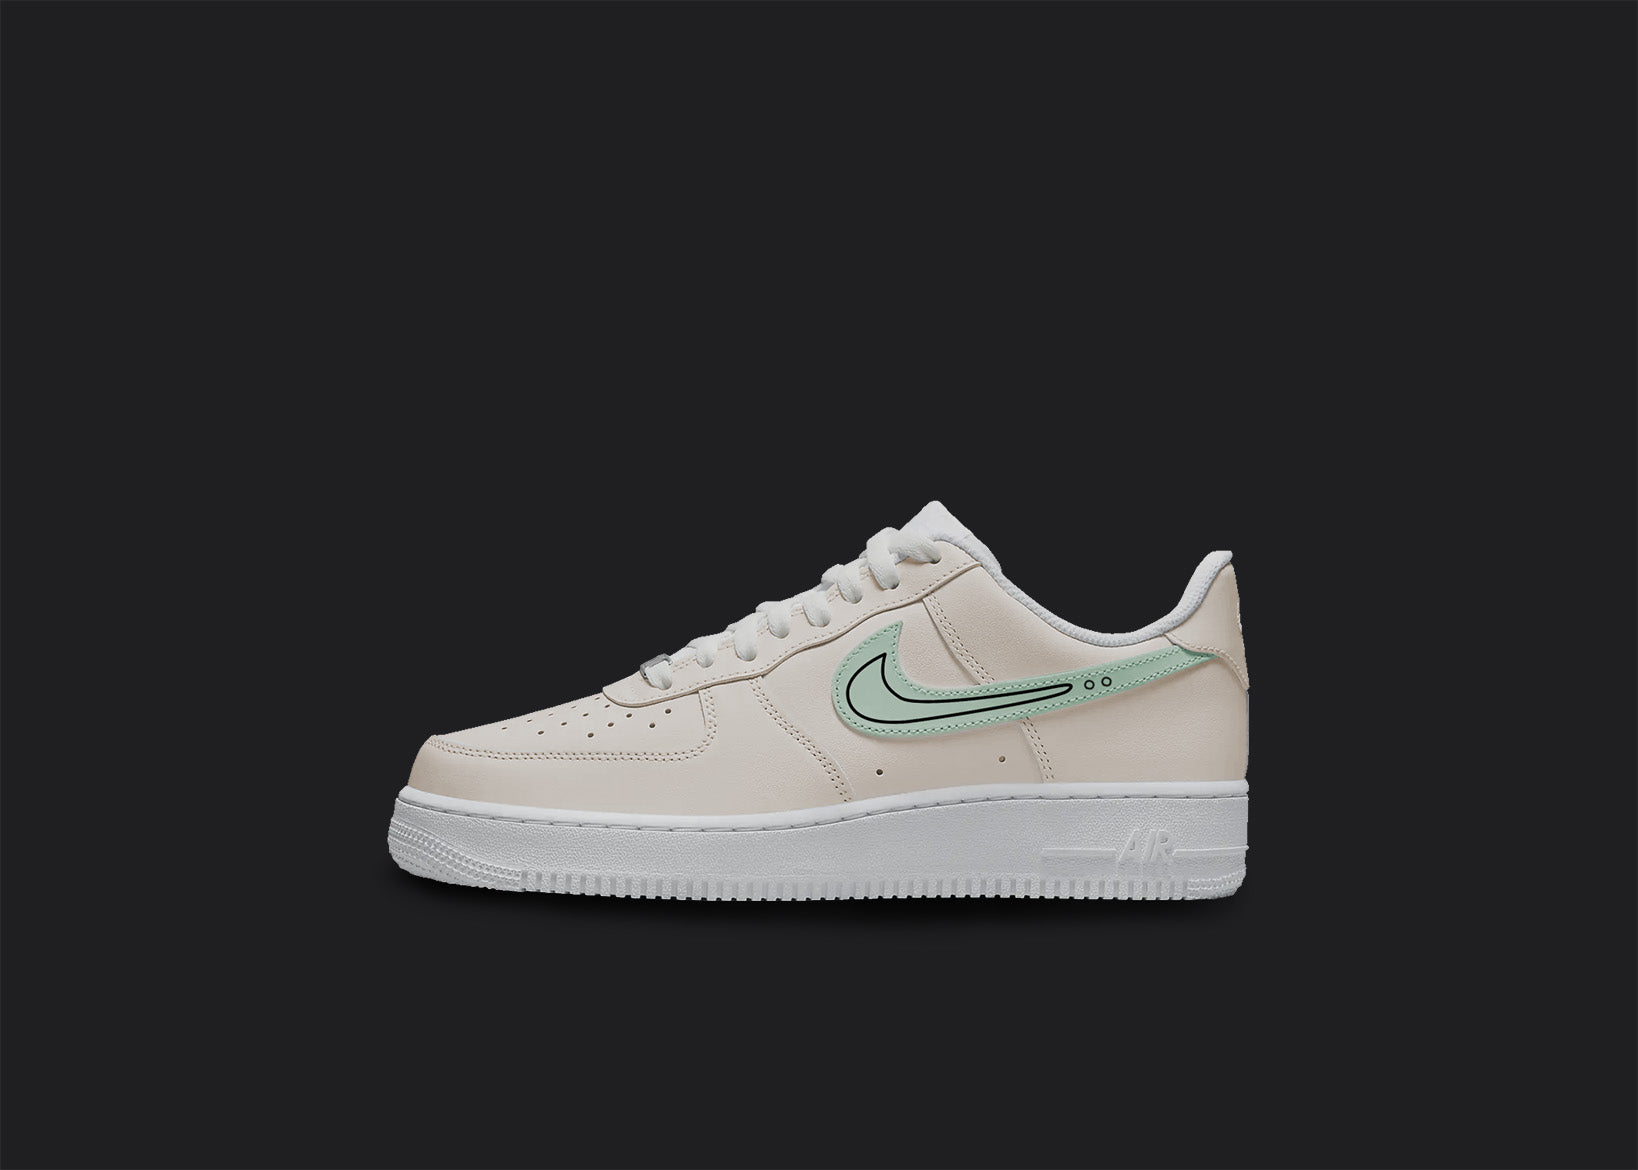 The image is of a Custom Nike Air force 1 sneaker on a blank black background. The white custom sneaker has a creme colorway with a mint nike logo. 